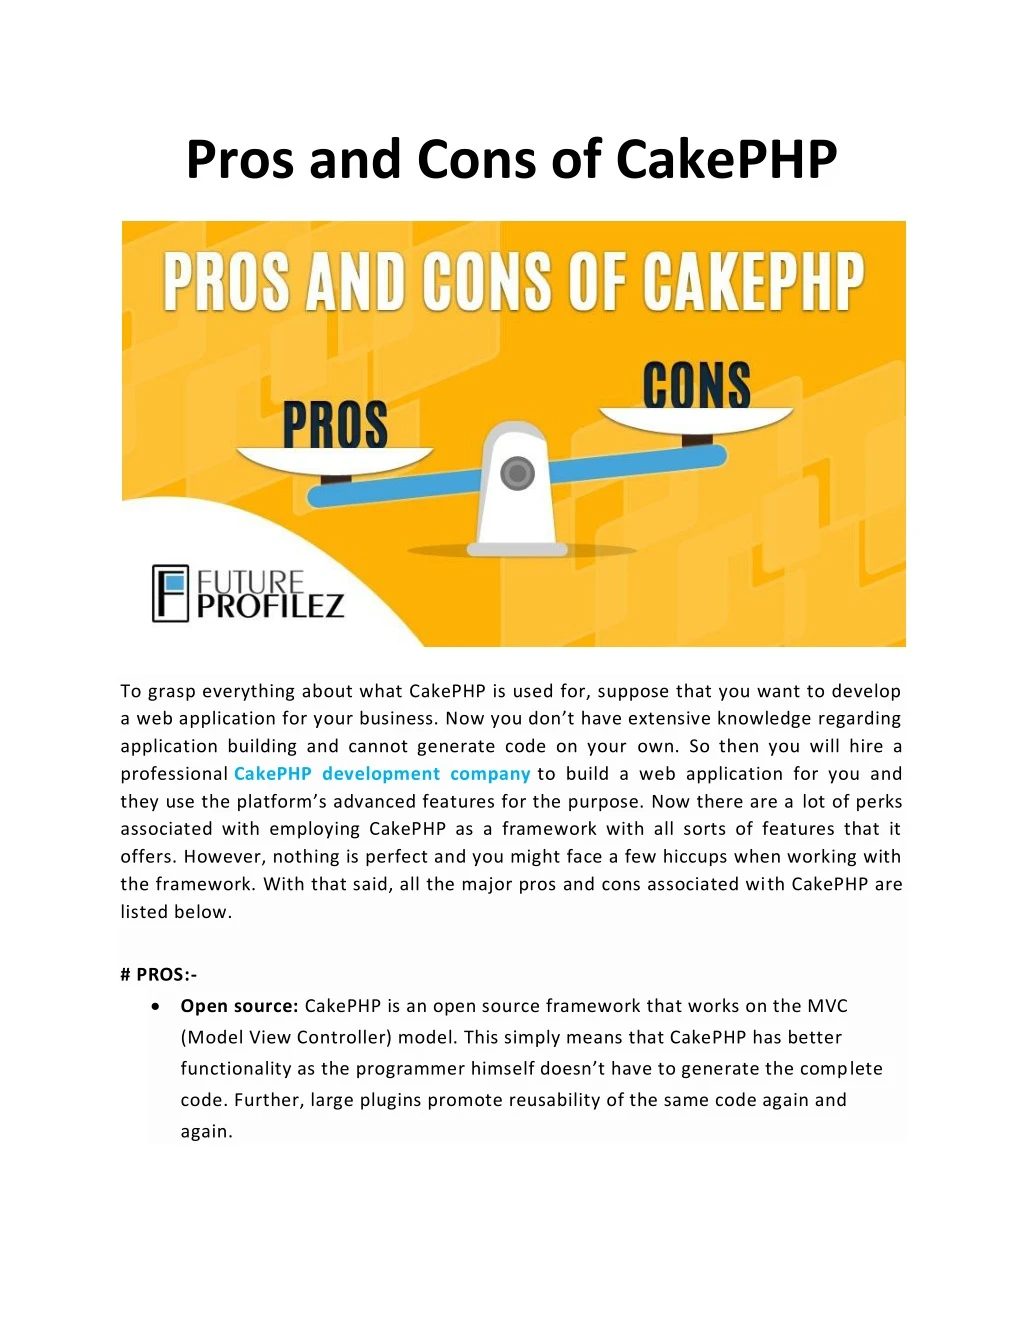 pros and cons of cakephp